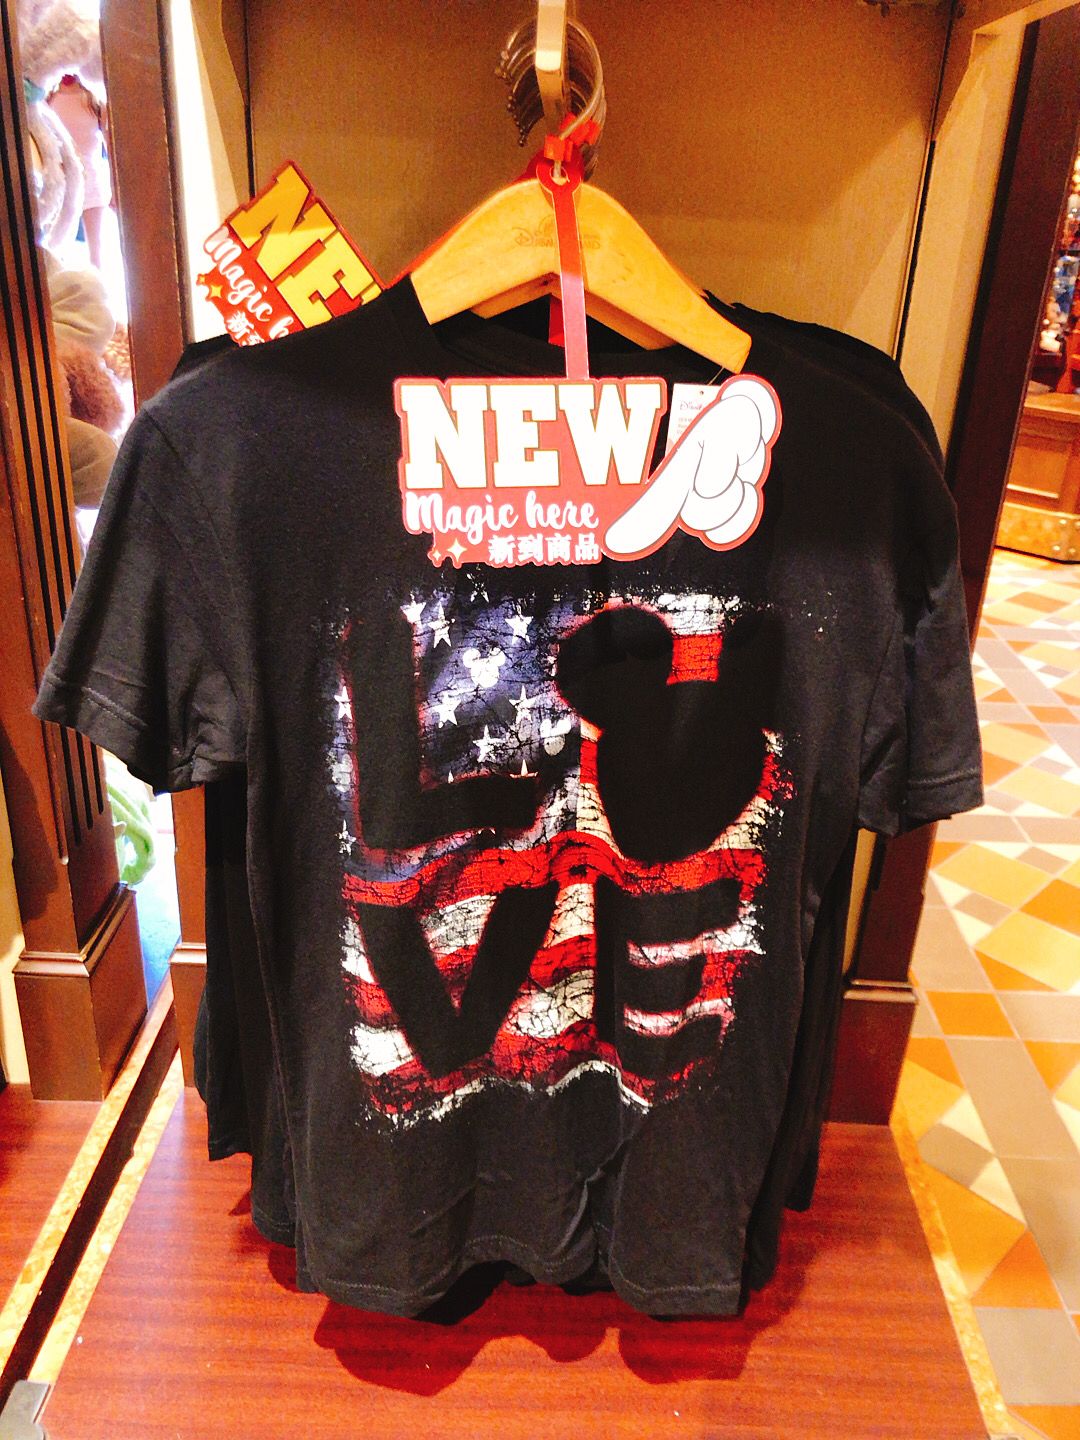 HKDL- Mickey Mouse USE LOVE shirt